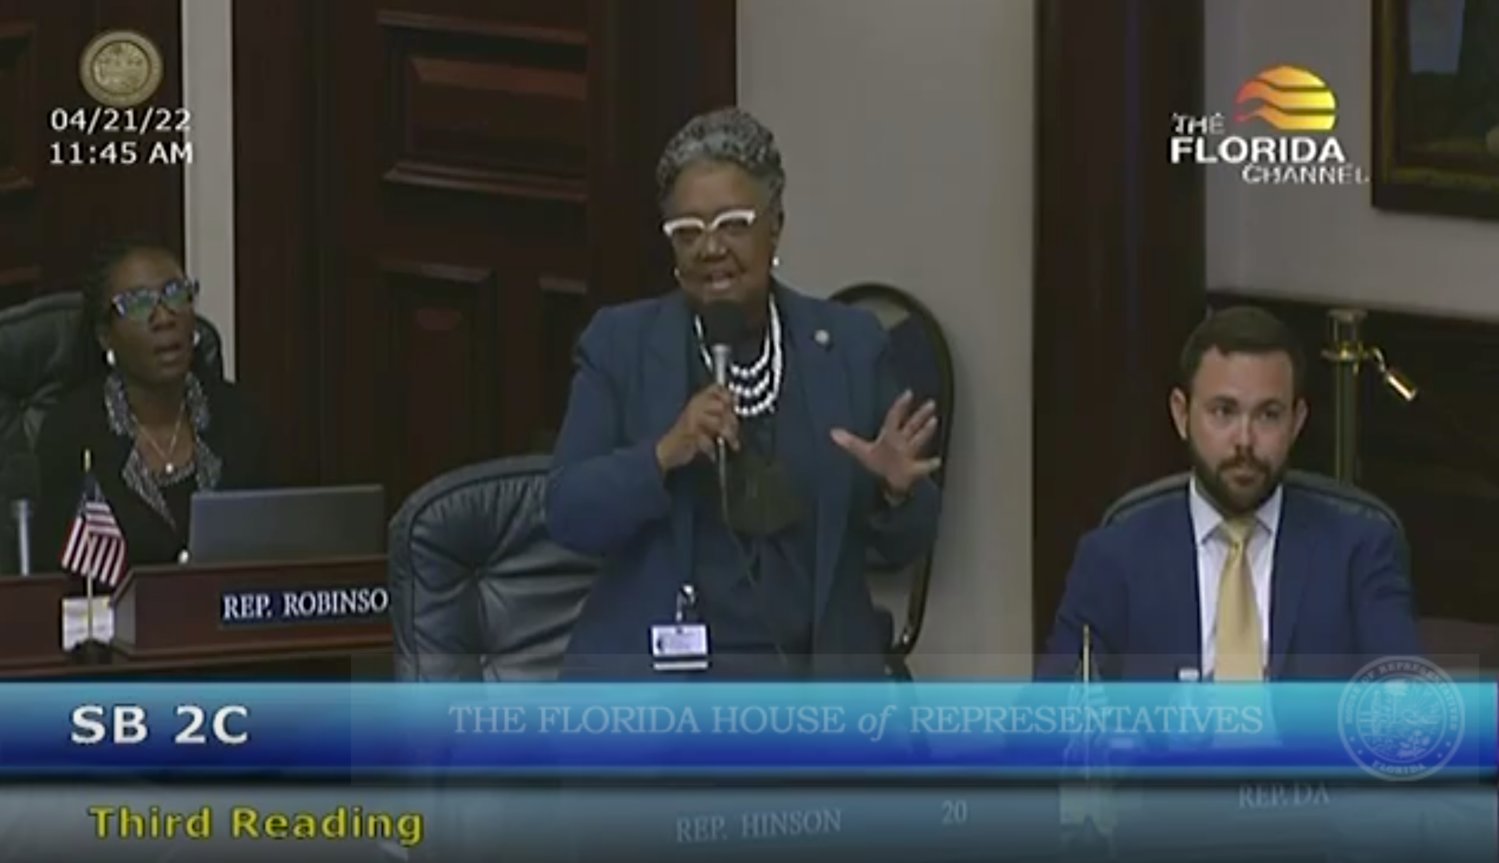 State Representative Yvonne Hayes Hinson (D - Gainesville) attempted to convince legislators to reject the Governor's redistricting map. She was unsuccessful, and her mic was cut off.